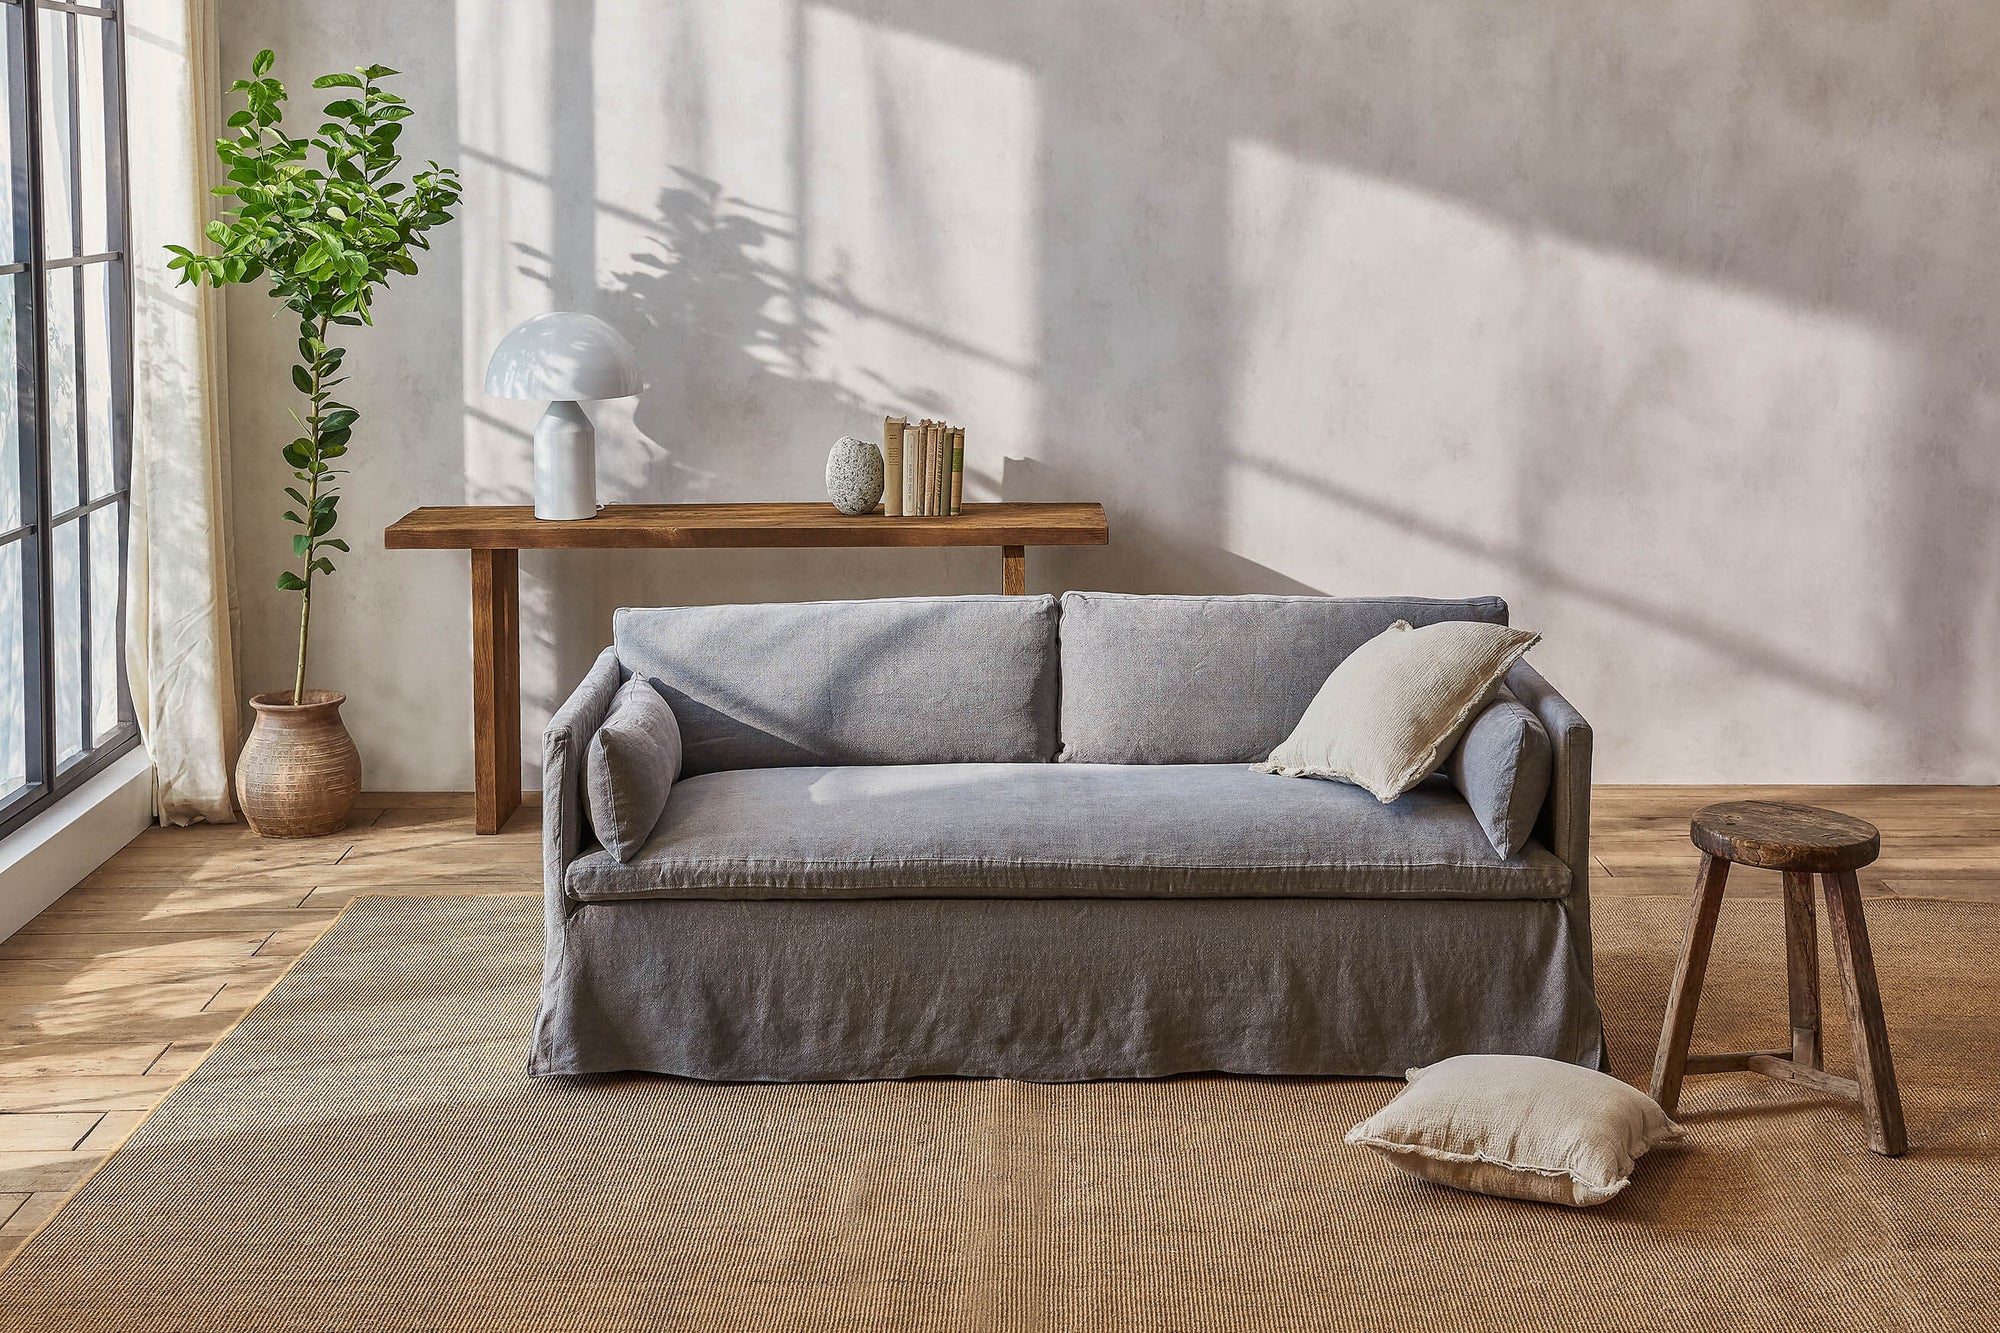 Gabriel 72" Sofa in Ink Cap, a medium cool grey Light Weight Linen, placed in a sunlit room with surrounding cushions and a stool